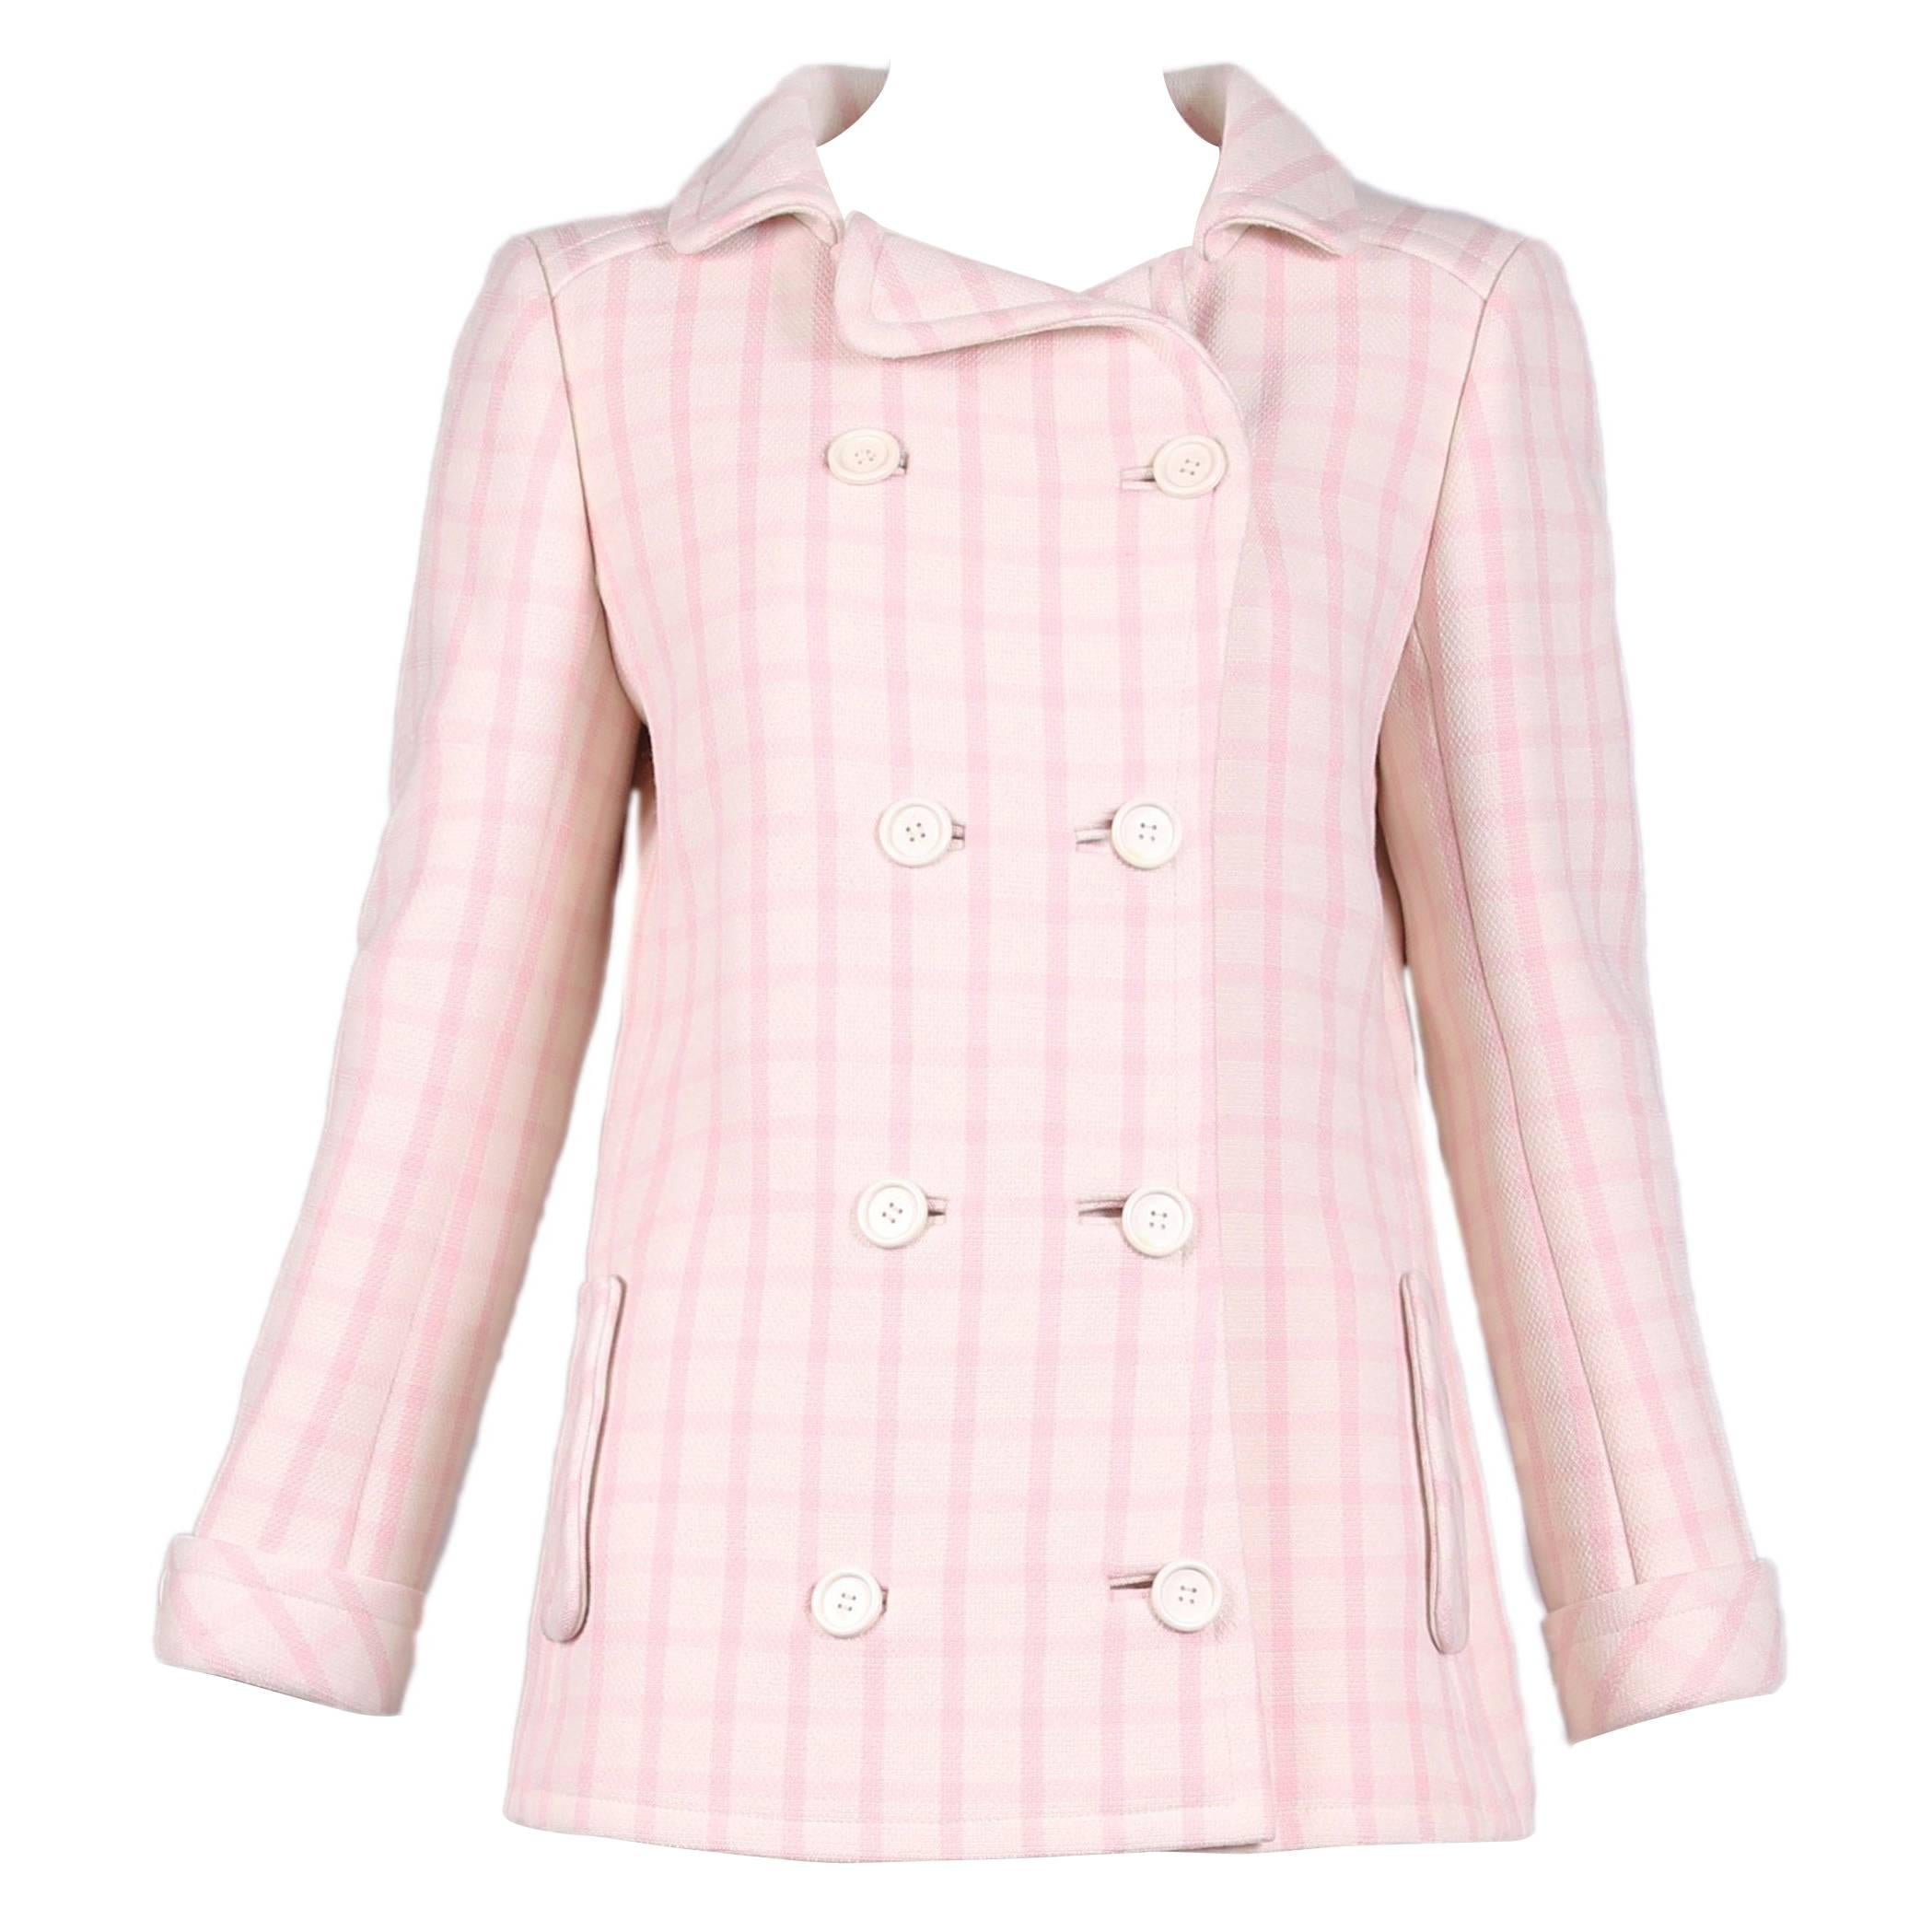 1968 Courrèges Pink & White Checked Double-Breasted Jacket